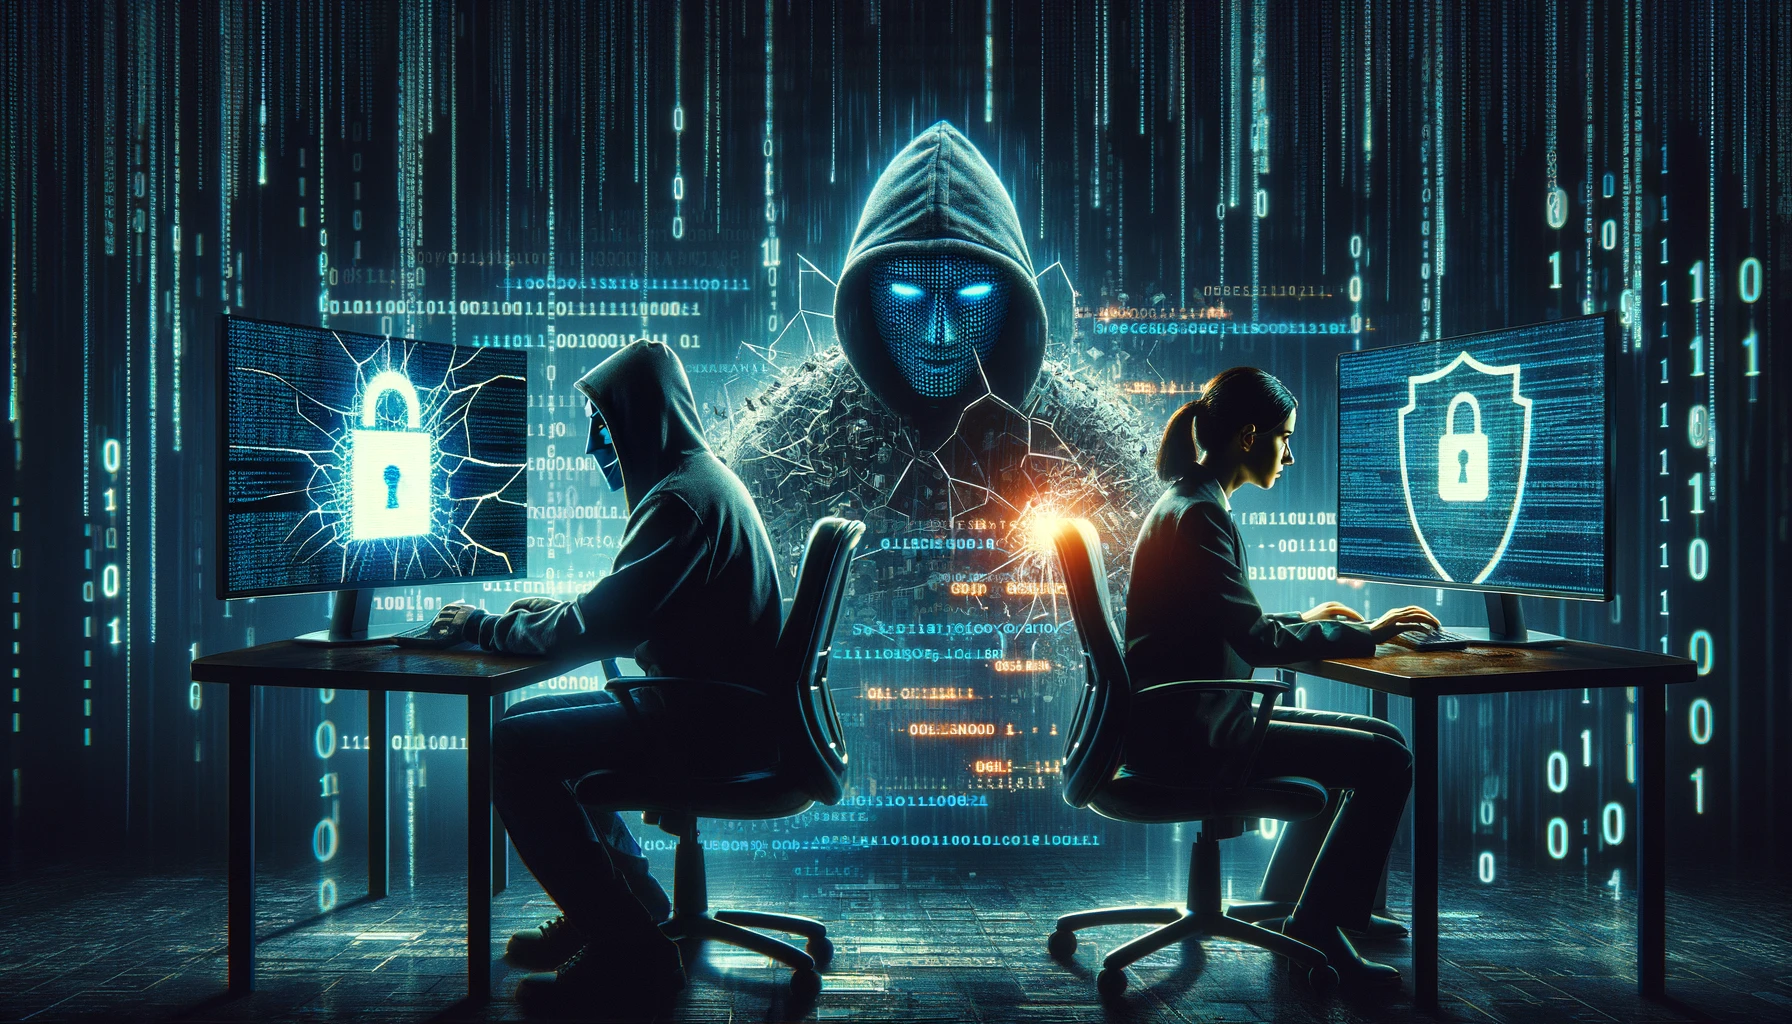 Hacking and cybersecurity